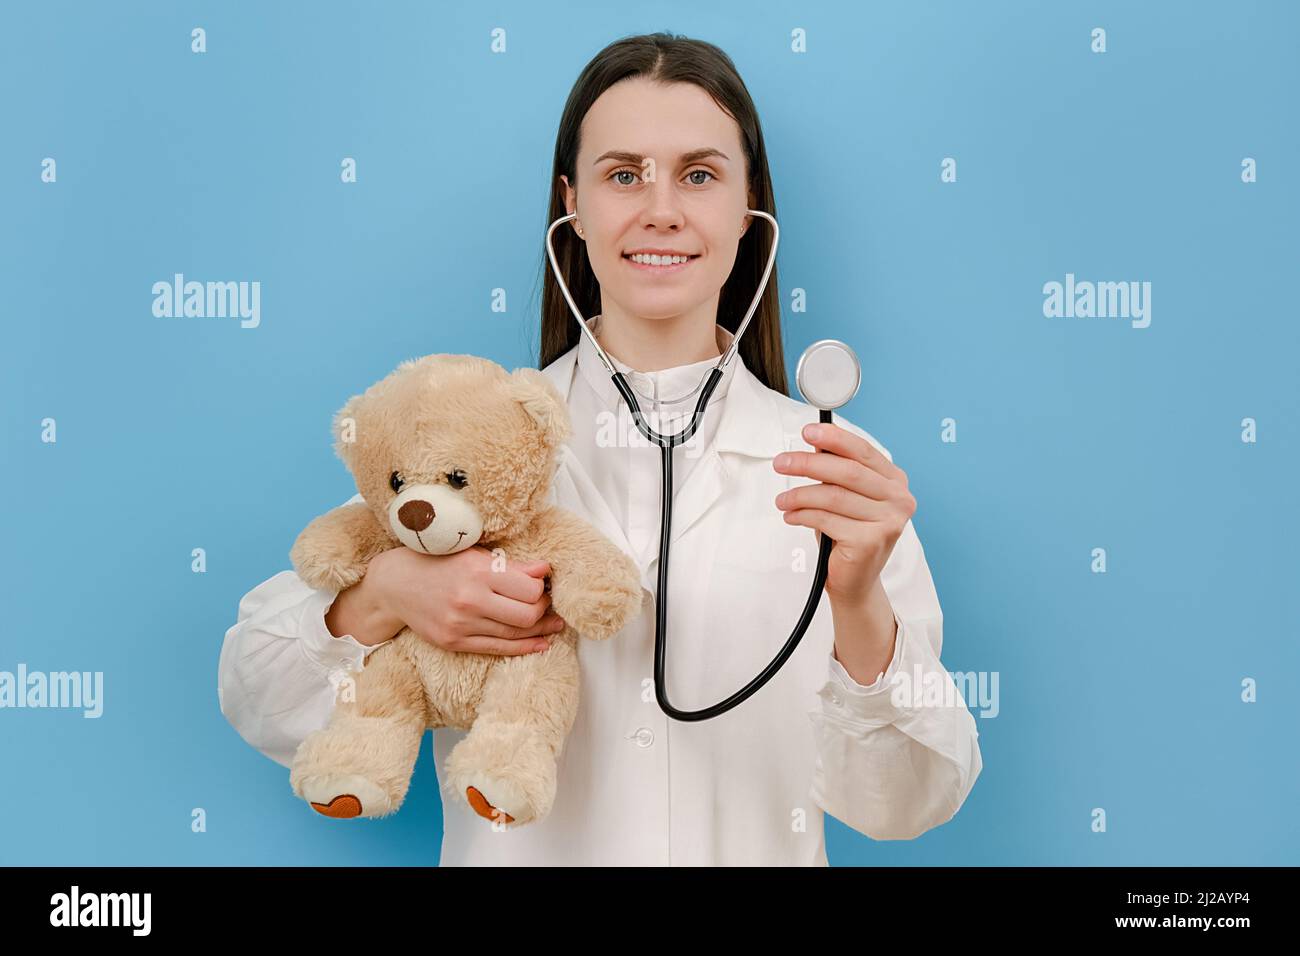 Portrait of cute smiling young woman doctor holding stethoscope and small fluffy bear, looking at camera, isolated over blue color background wall in Stock Photo